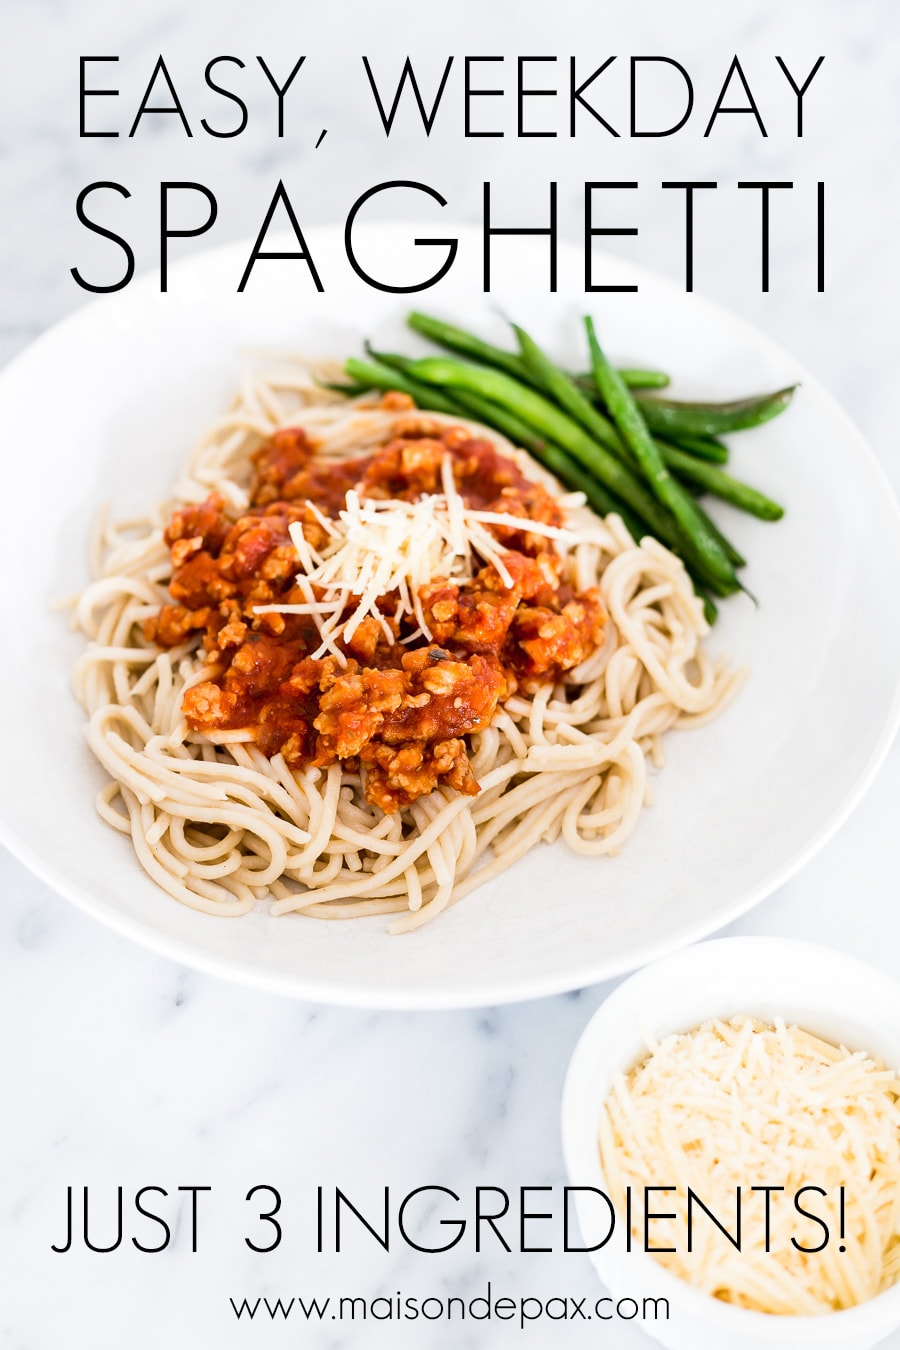 spaghetti with meat sauce, green beans, and parmesan cheese | Maison de Pax